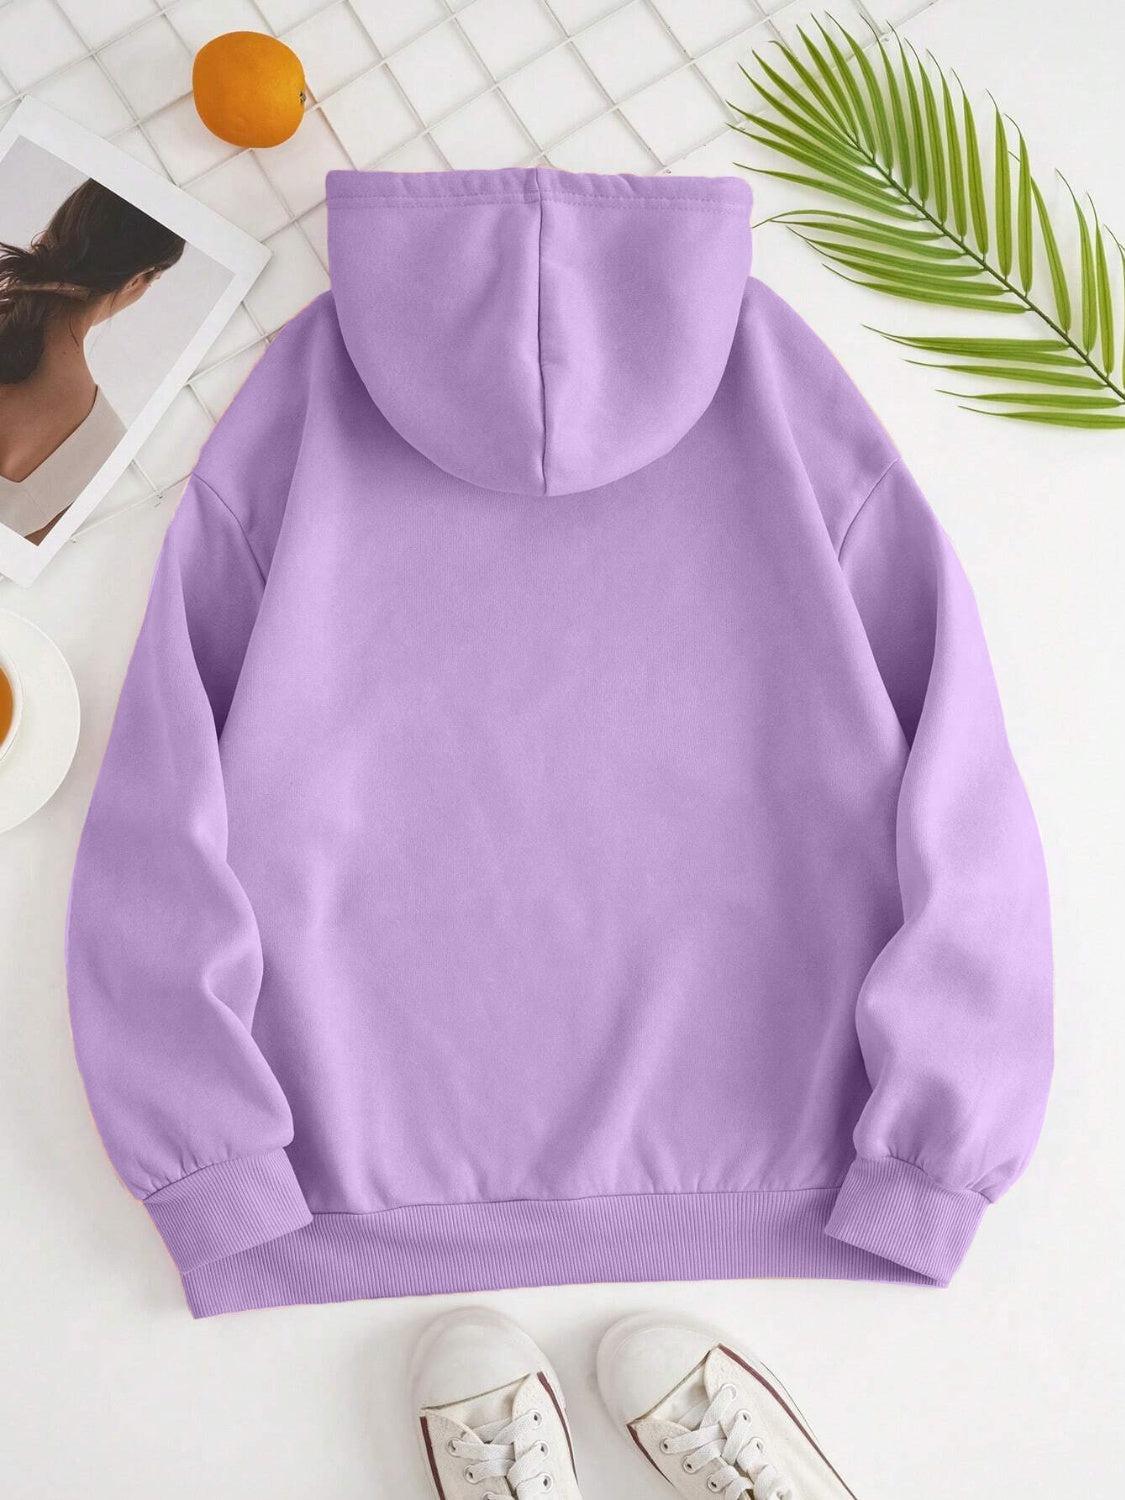 a purple hoodie with a pair of white shoes next to it